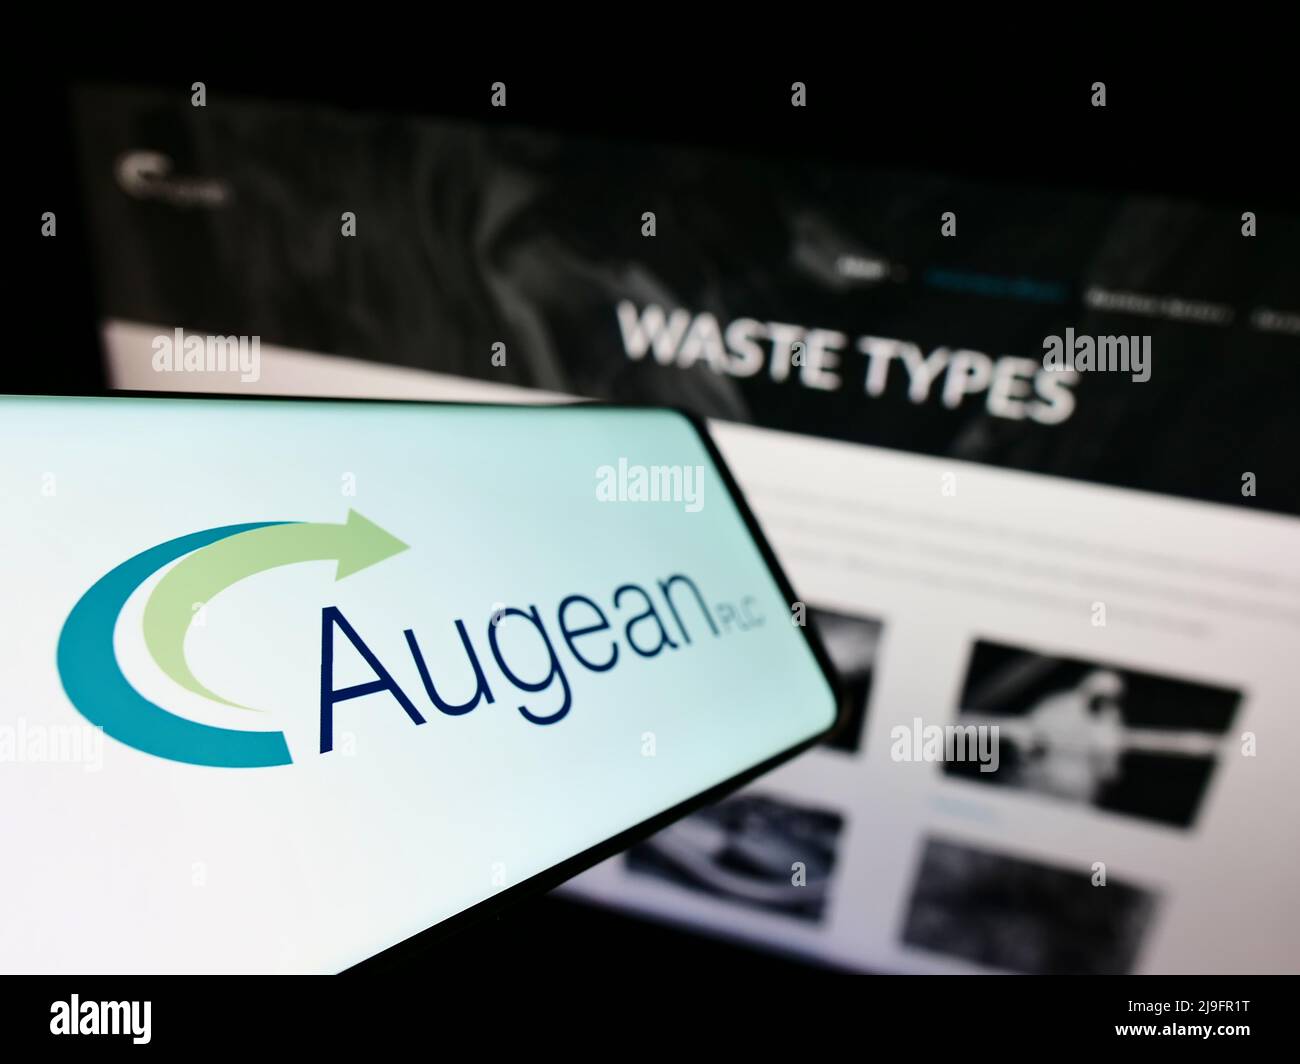 Cellphone with logo of British waste management company Augean plc on screen in front of business website. Focus on left of phone display. Stock Photo